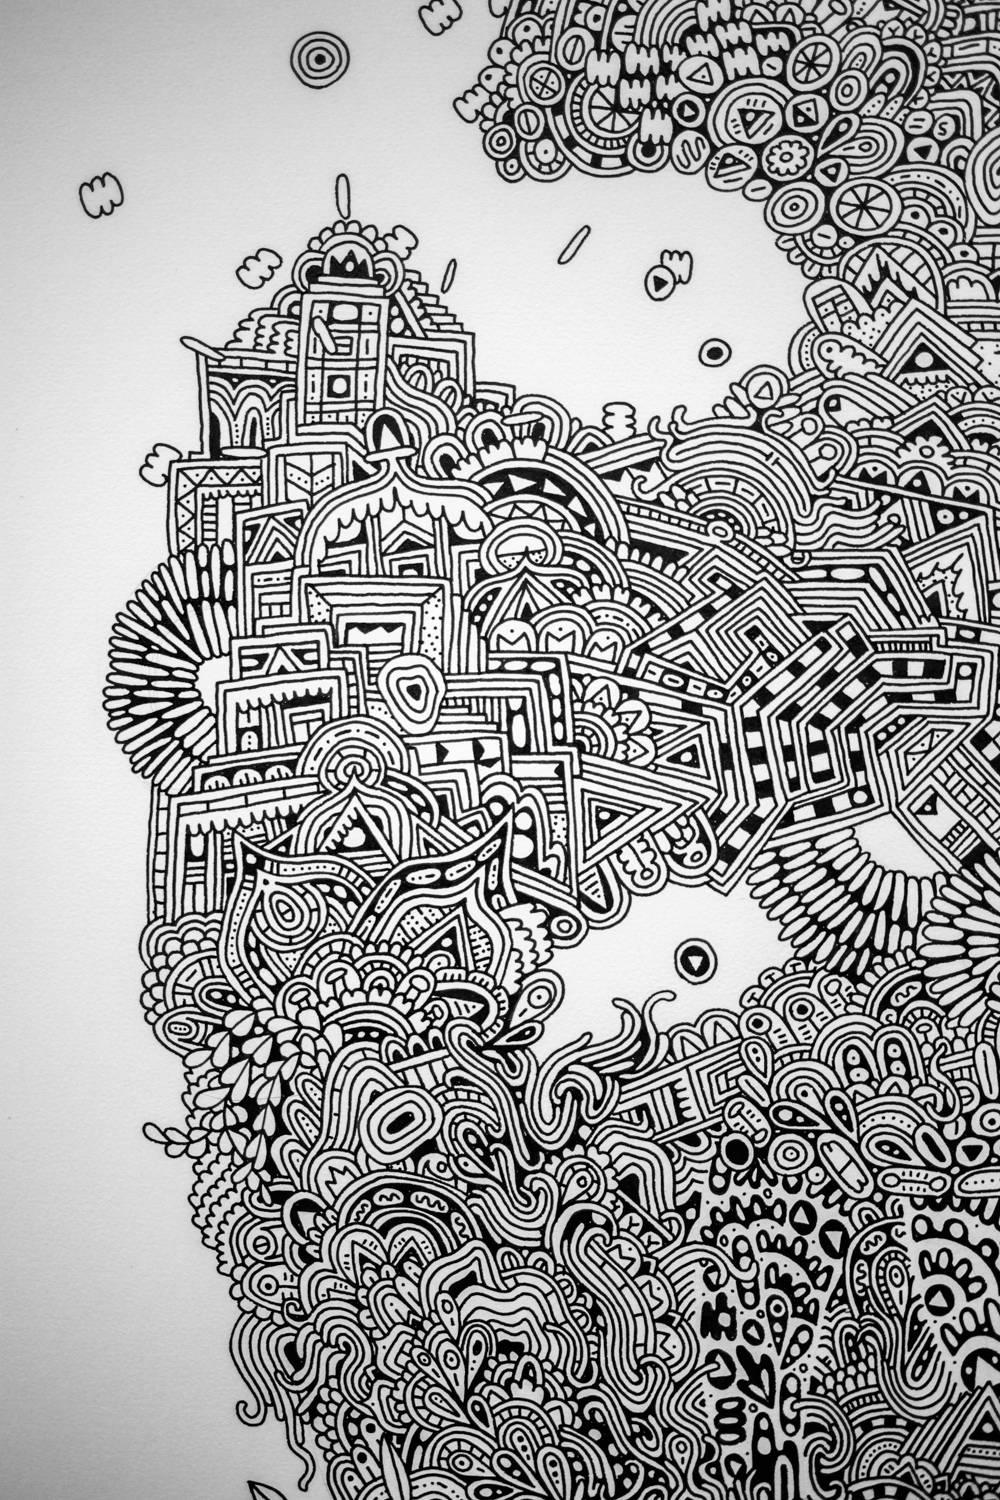 Original 30in x 20in drawing on paper mounted to wood panel by Austin-based Texas artist Sophie Roach.

Sophie Roach is a self-taught artist and illustrator based in Austin, TX. She discovered her passion for compulsive drawing when she was